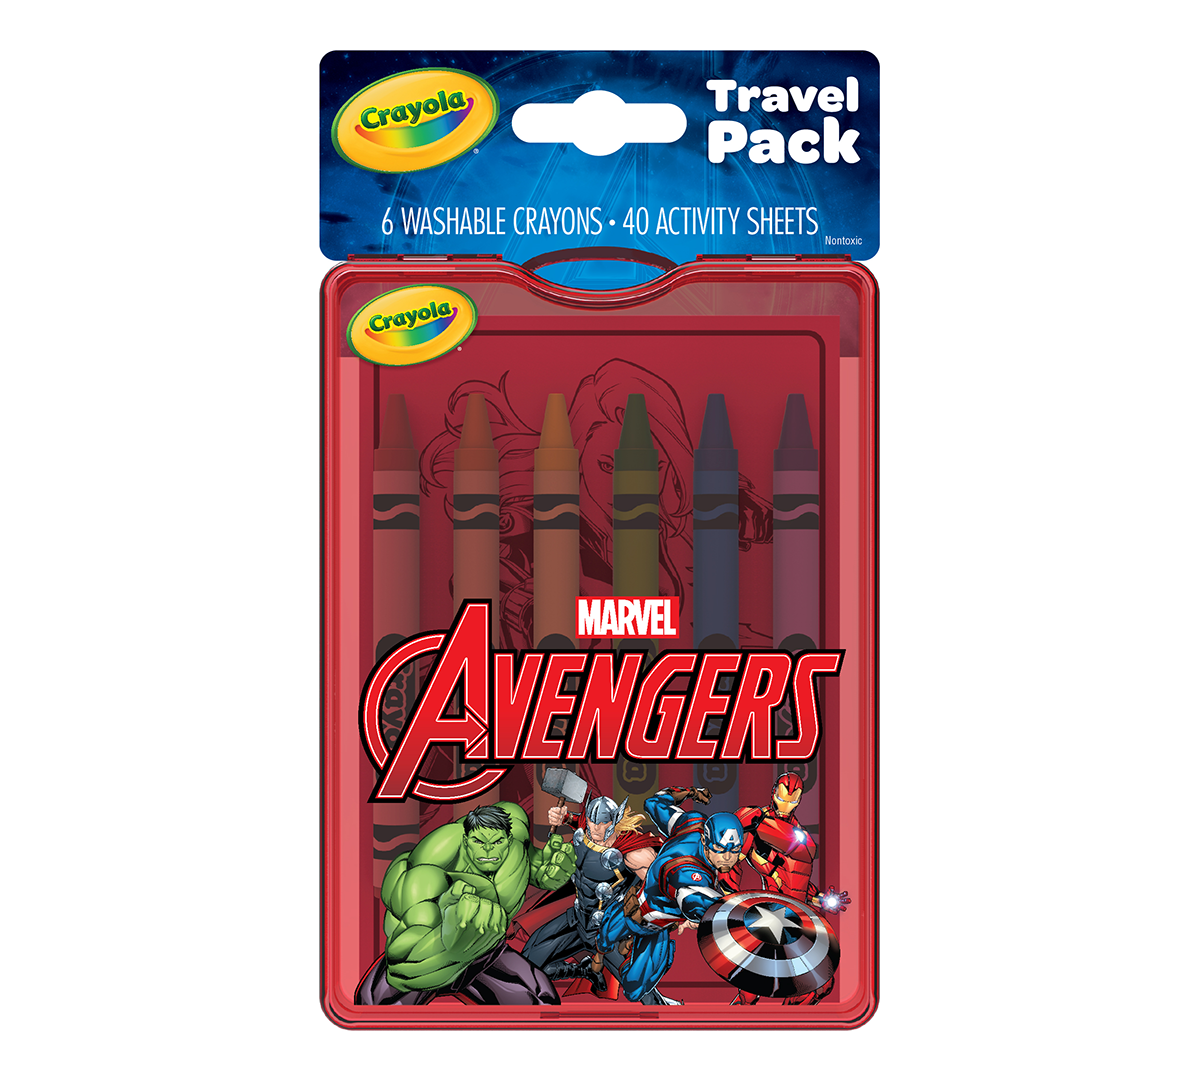 Download Crayola Travel Pack; Marvel's Avengers Edition; 6 Washable ...